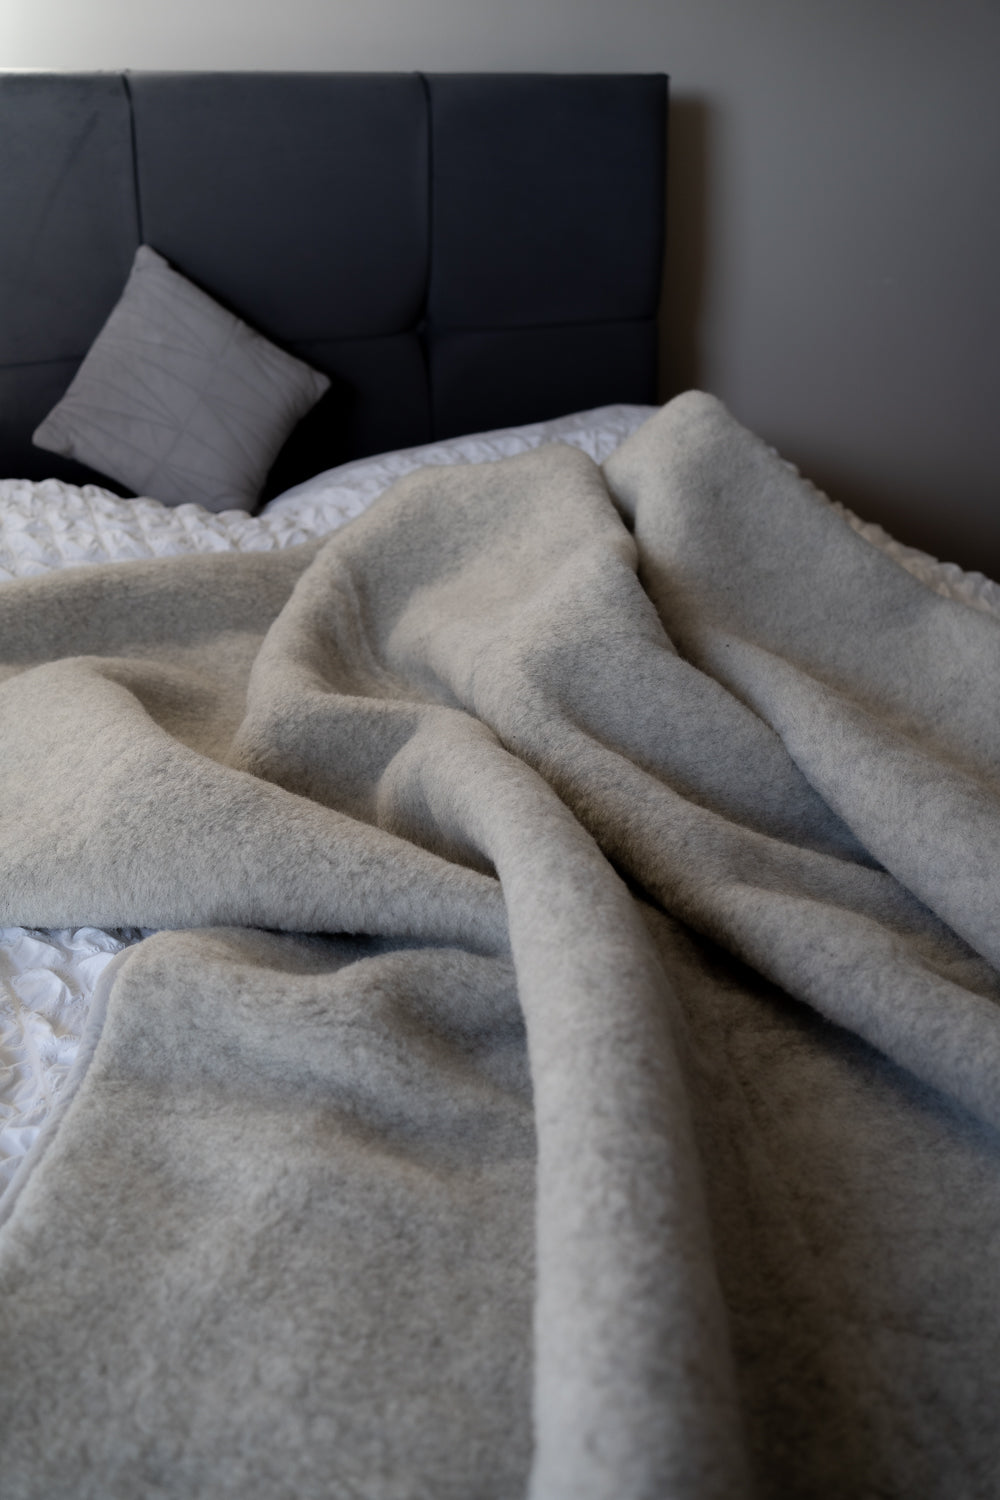 grey,Warm and cosy looking woollen blanket on the bed